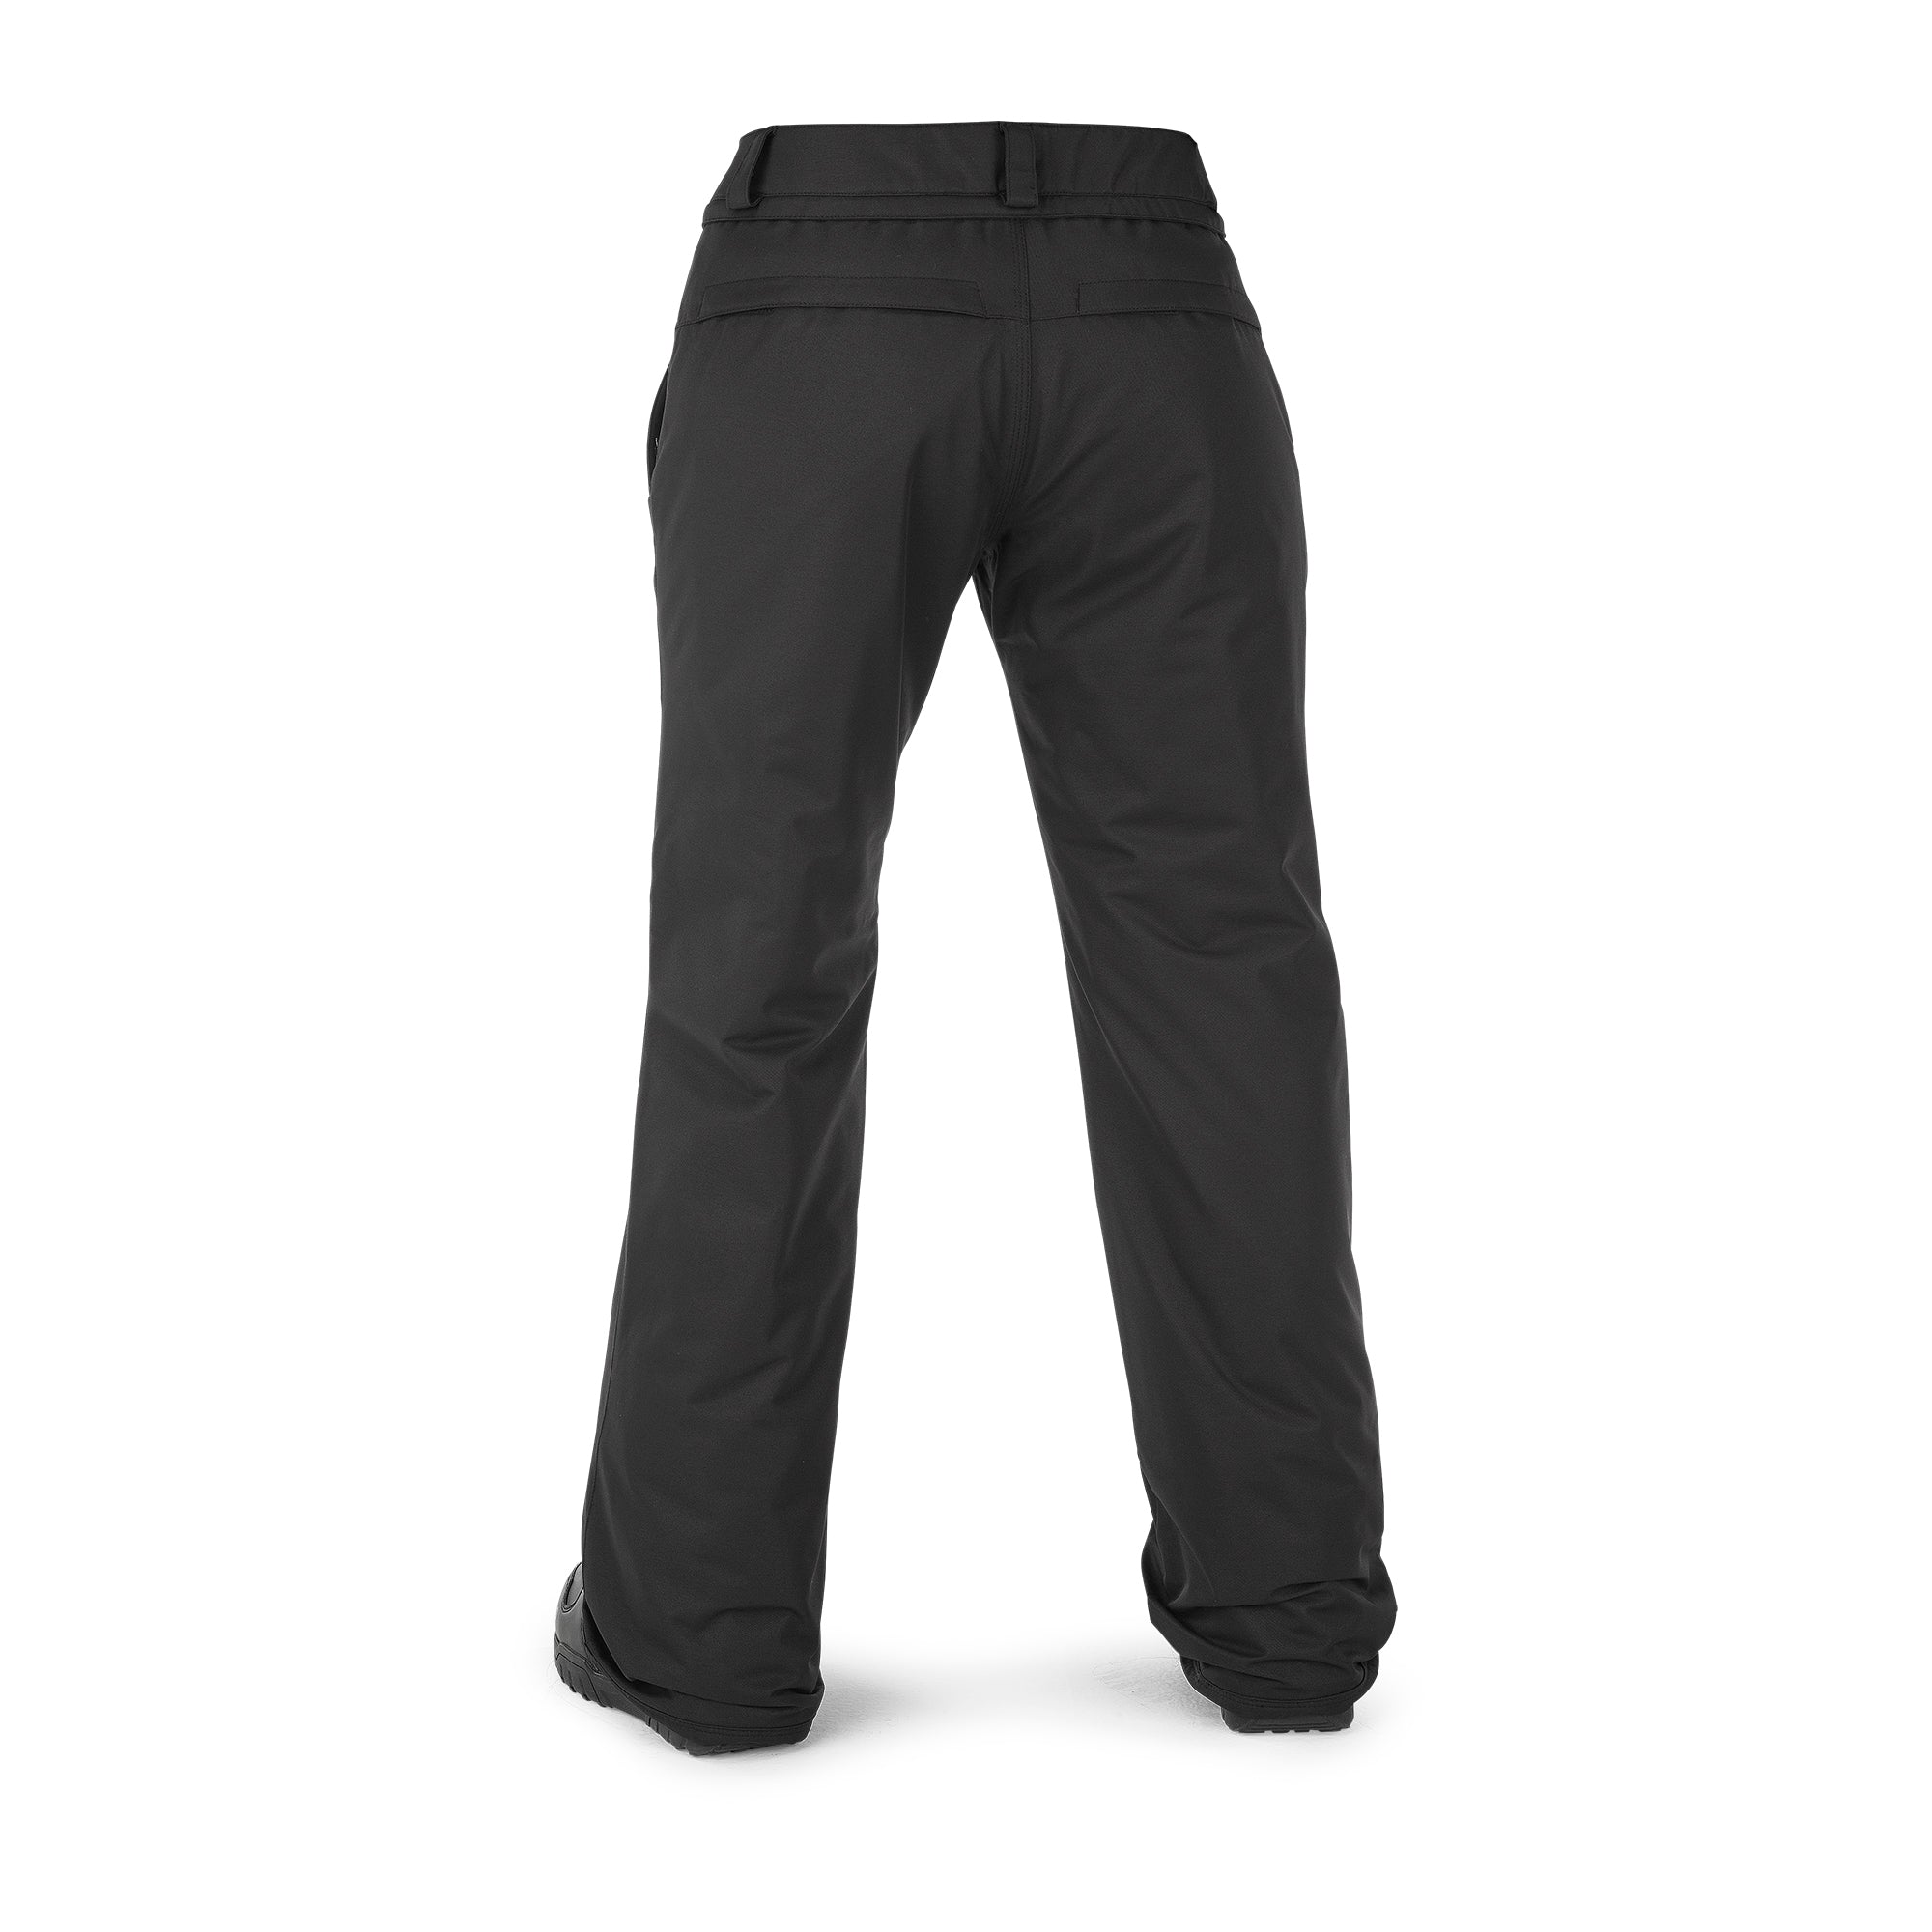 WOMEN'S FROCHICKIE INS PANT